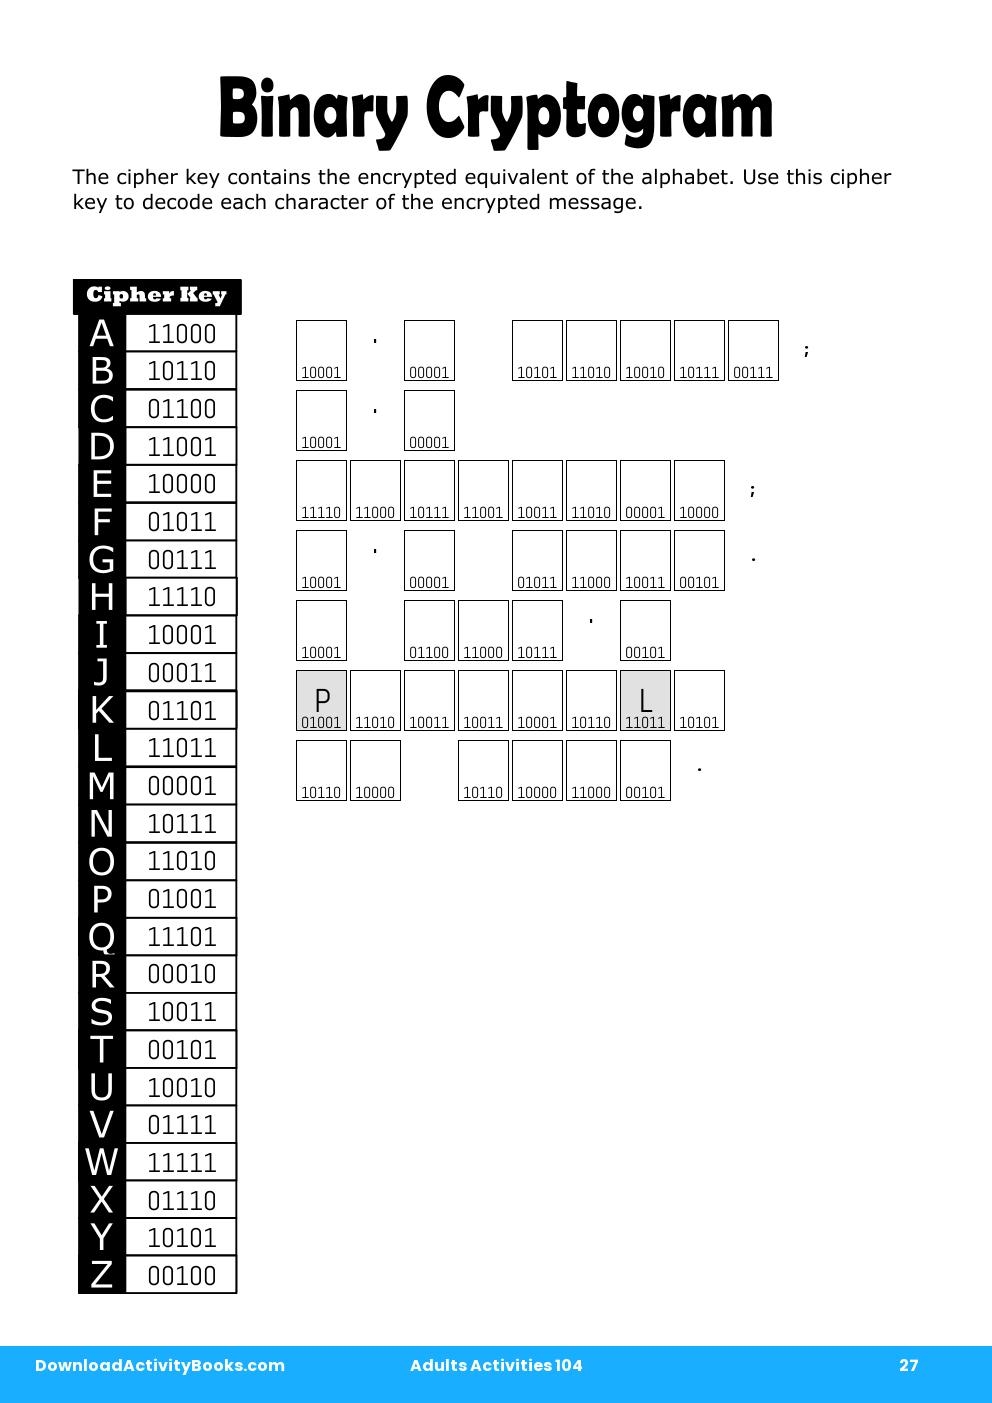 Binary Cryptogram in Adults Activities 104